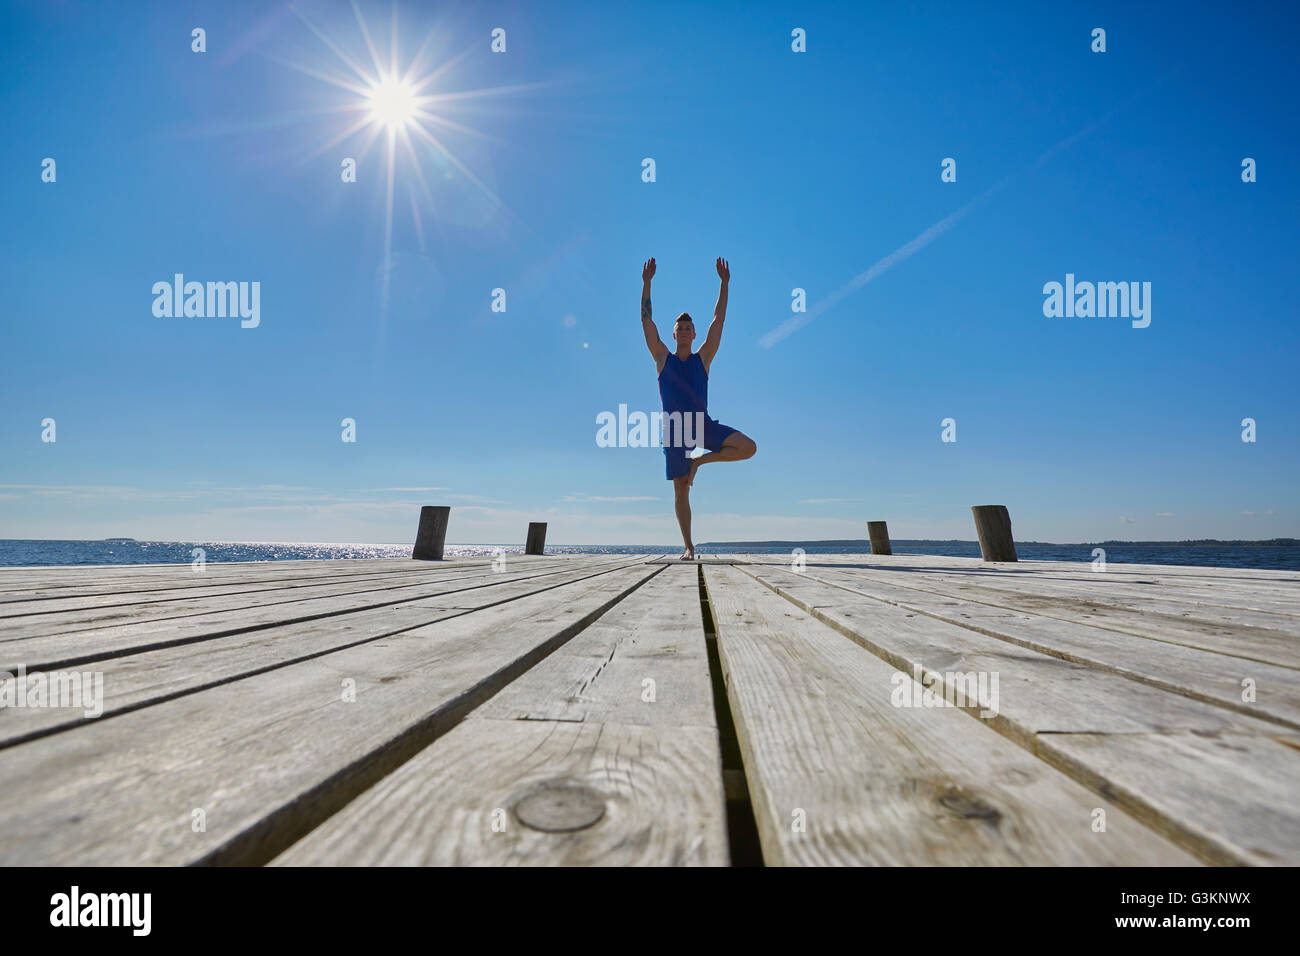 Mid distant view of man on pier, standing on one leg arms raised Stock Photo